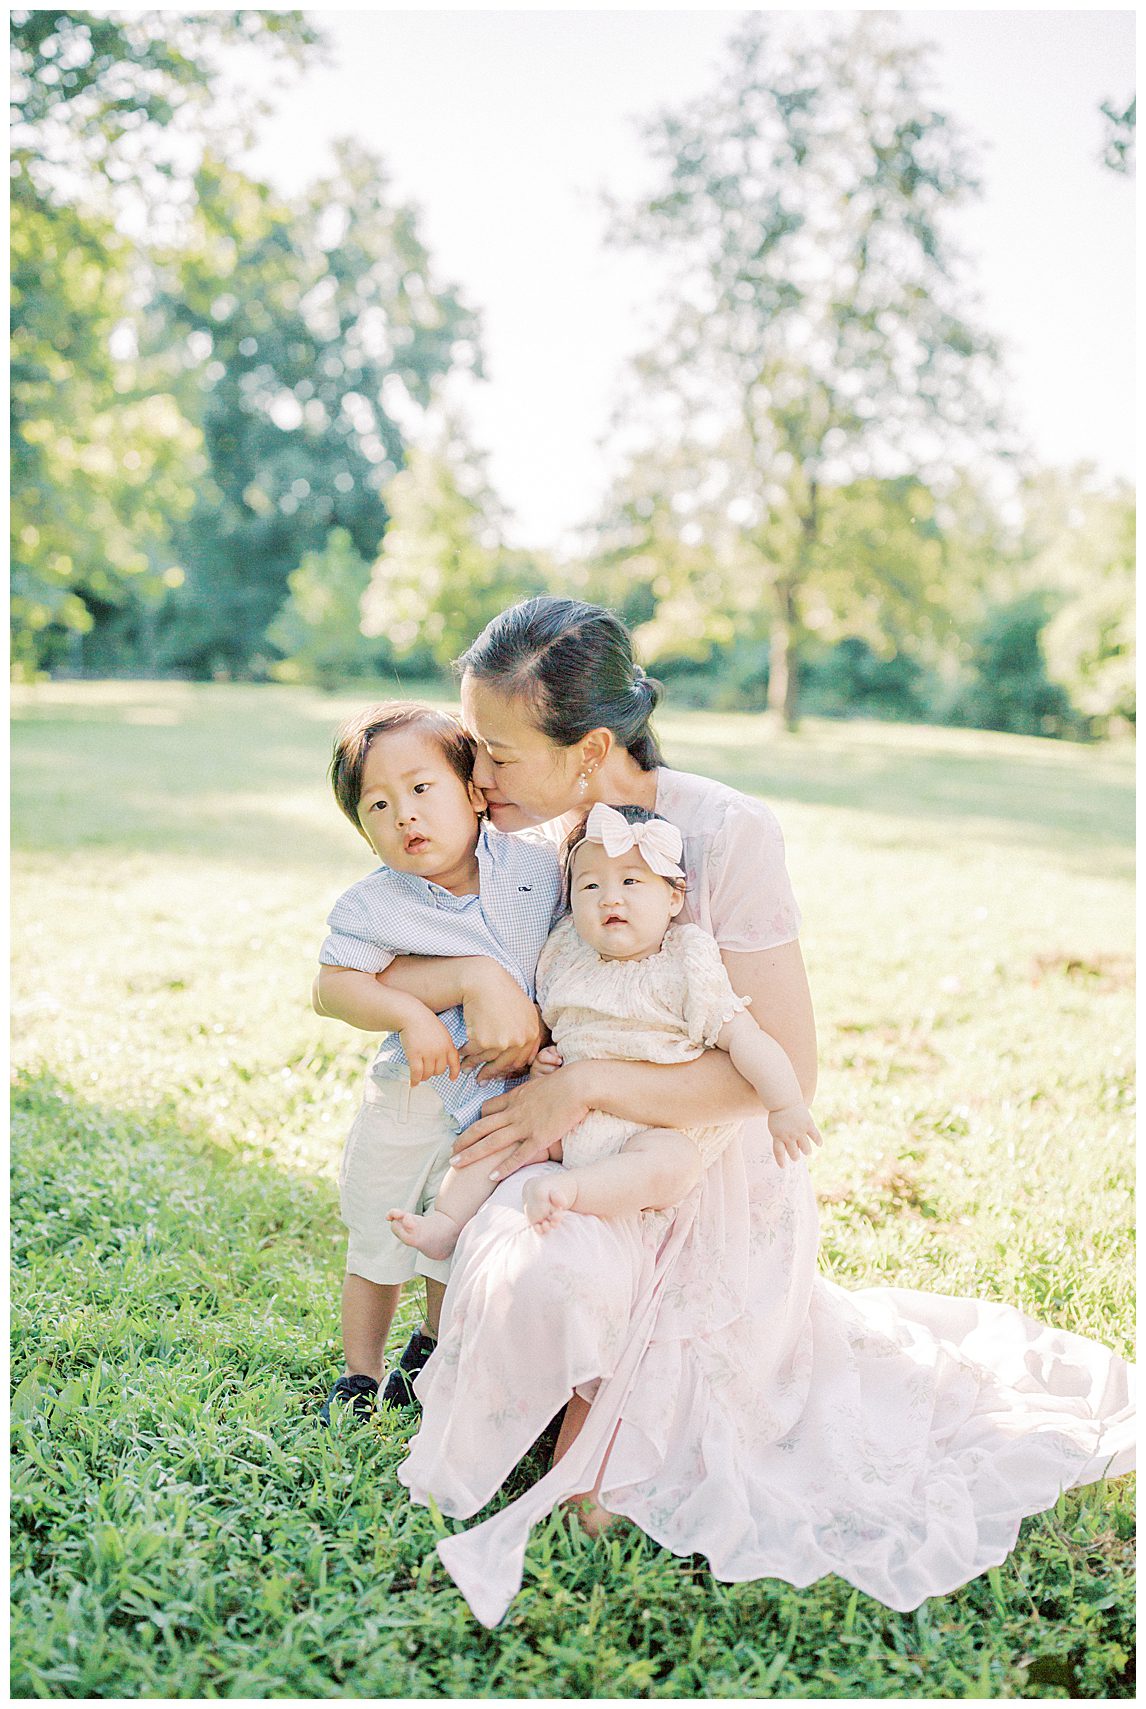 Mother in pink dress kneels down and kisses her toddler son's cheek while her infant daughter sits on her lap.